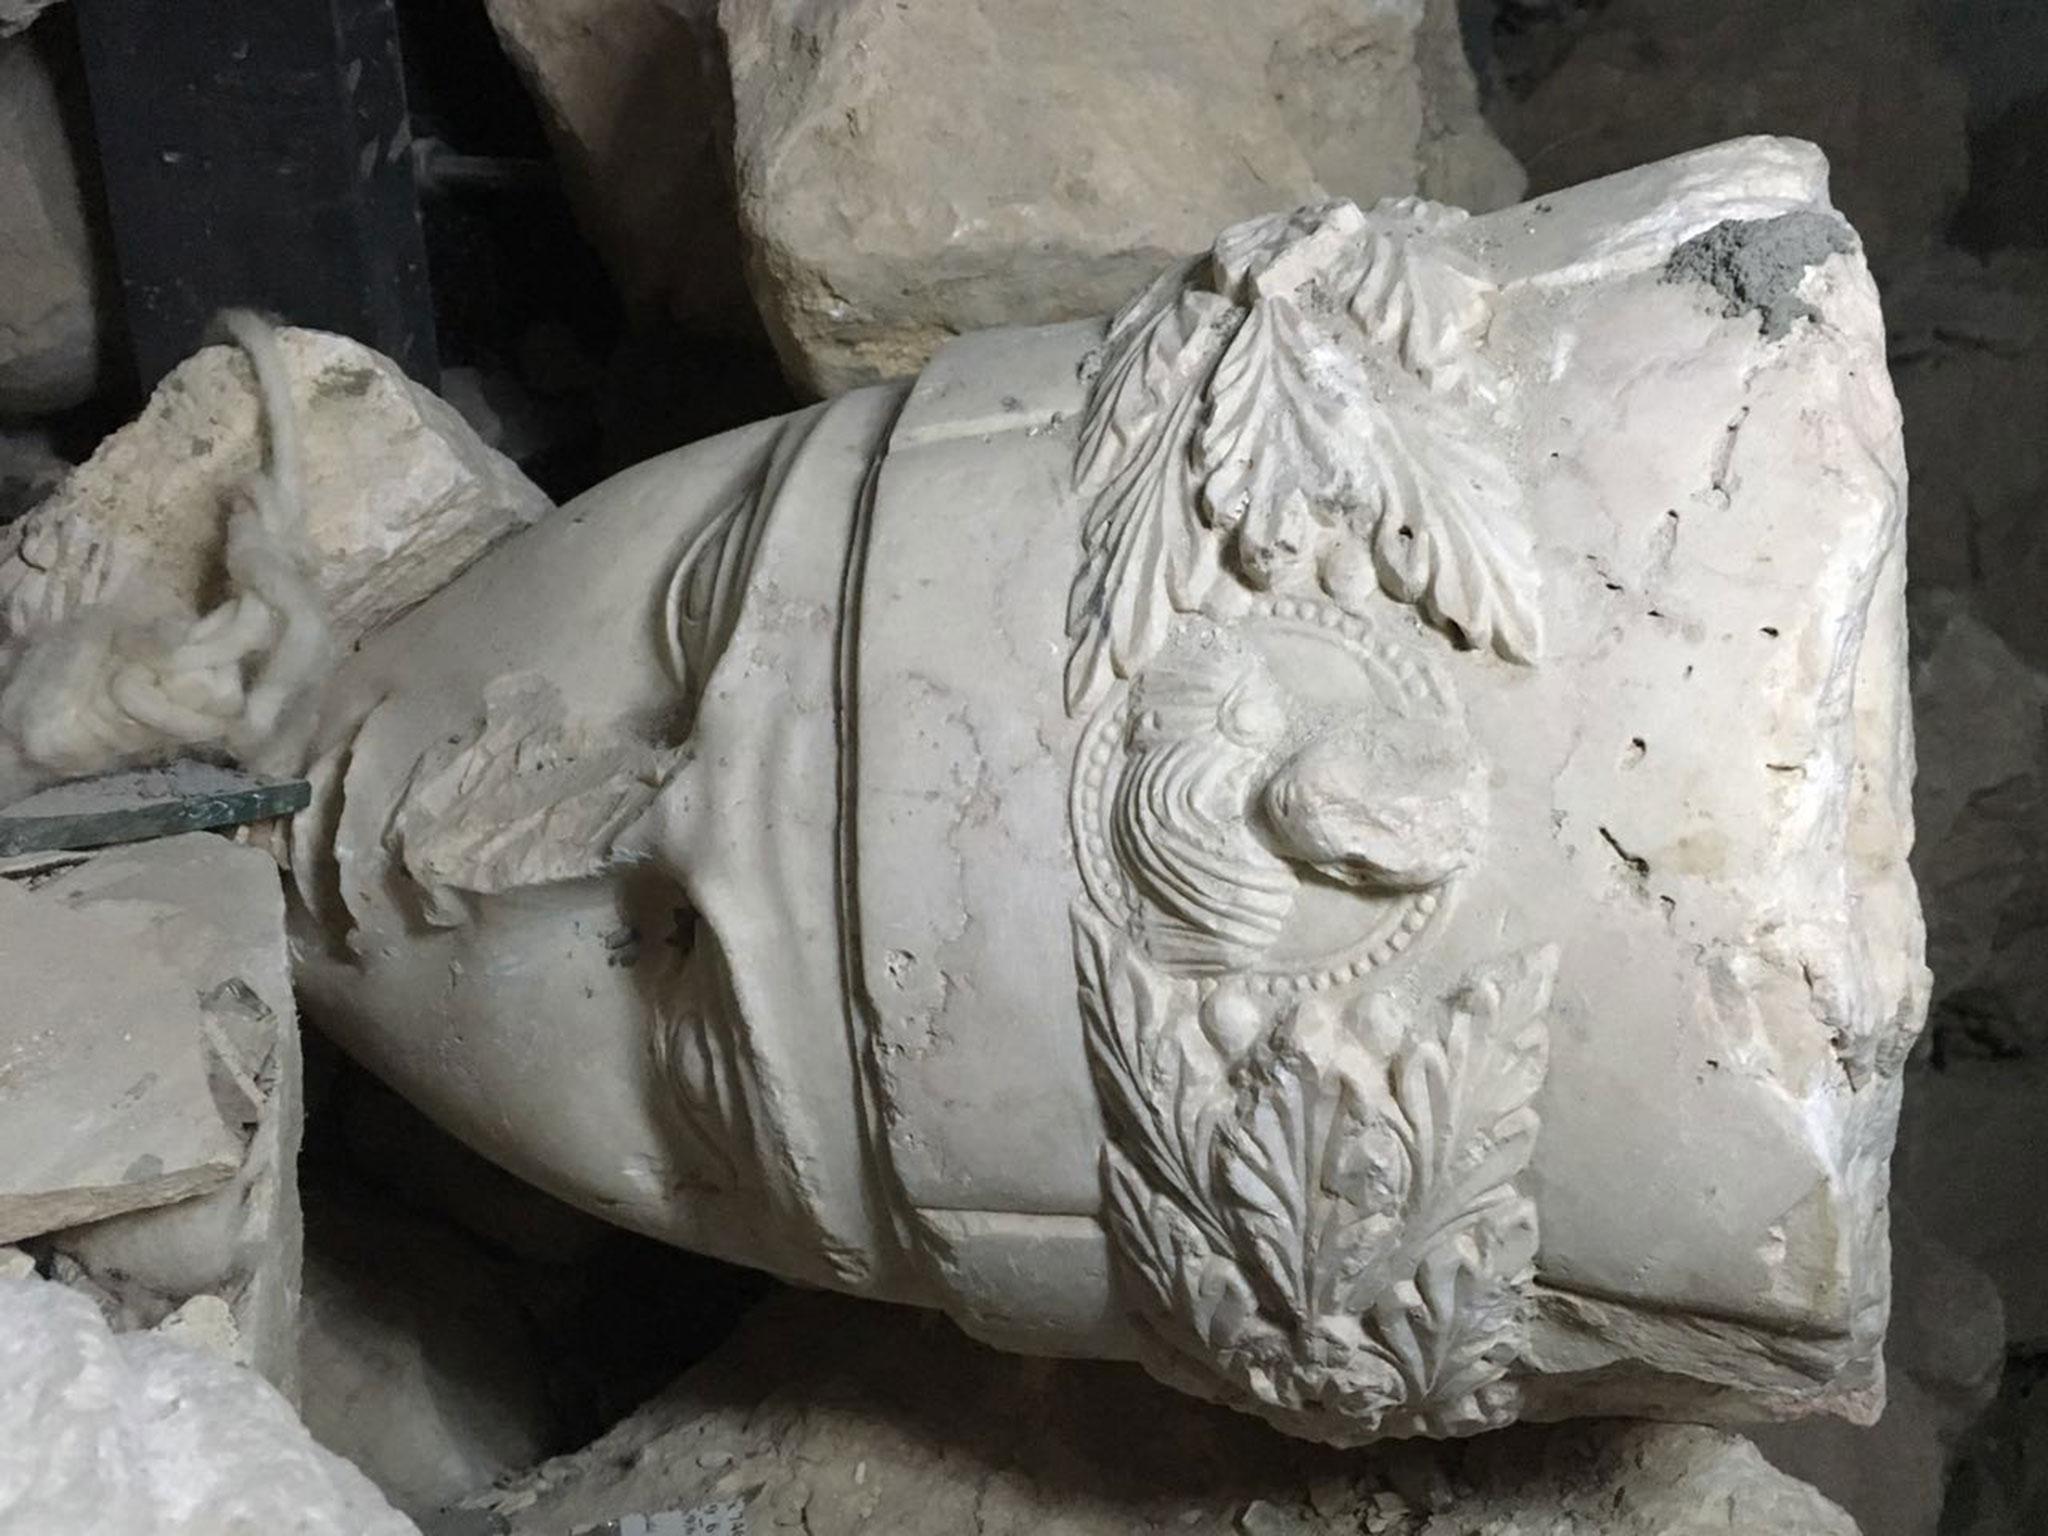 One of the relics from Palmyra moved to the National Museum of Damascus after Isis blew up the ancient city last year